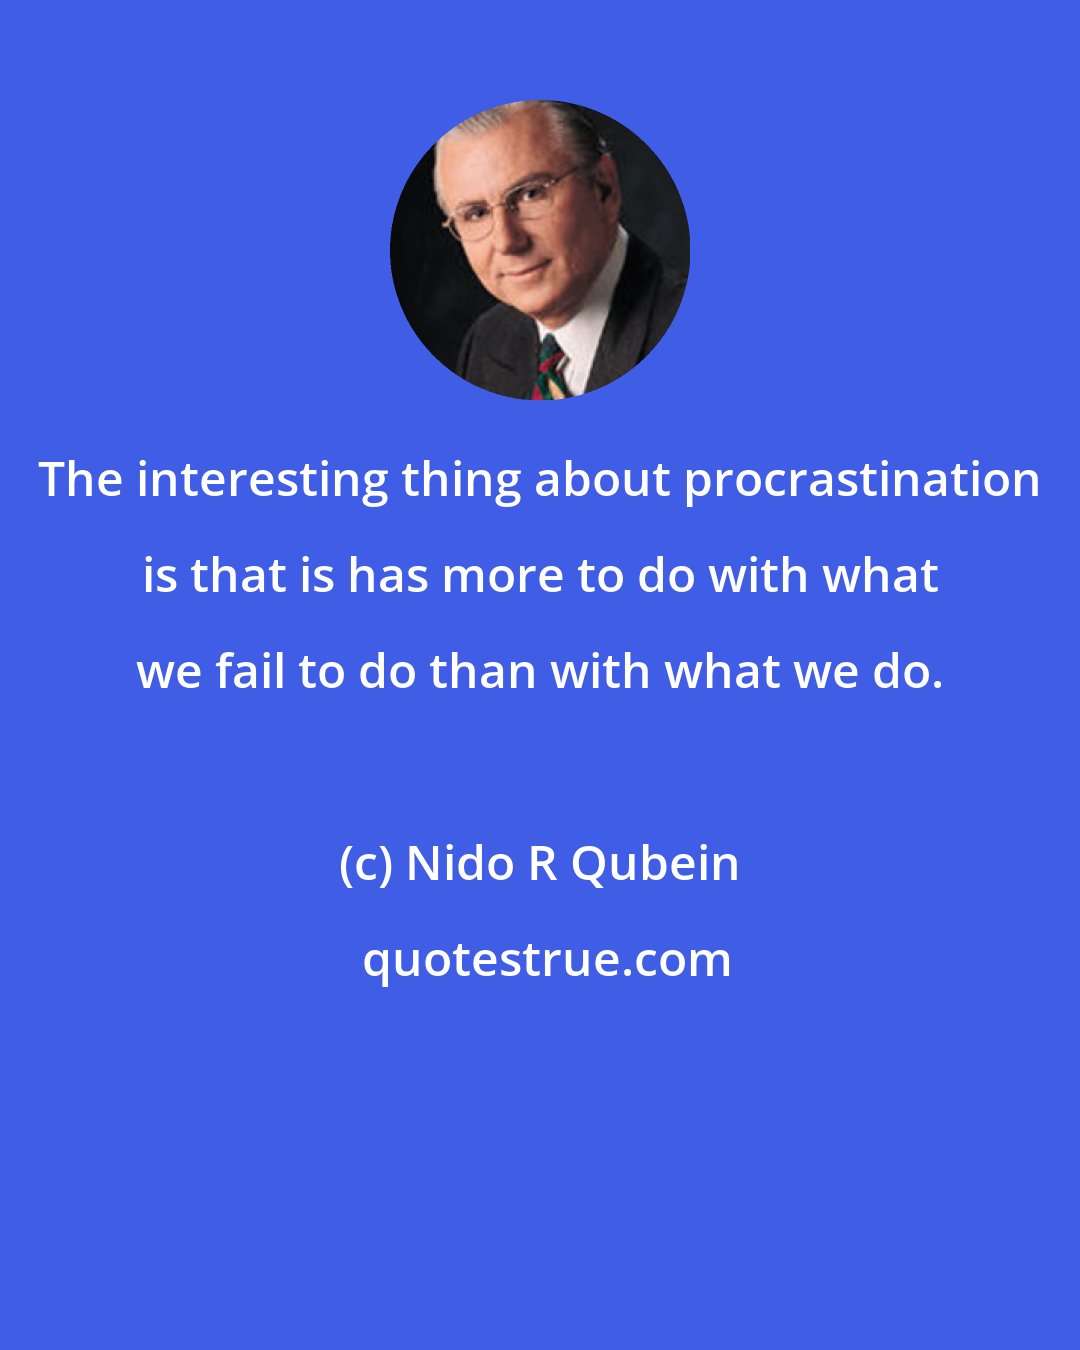 Nido R Qubein: The interesting thing about procrastination is that is has more to do with what we fail to do than with what we do.